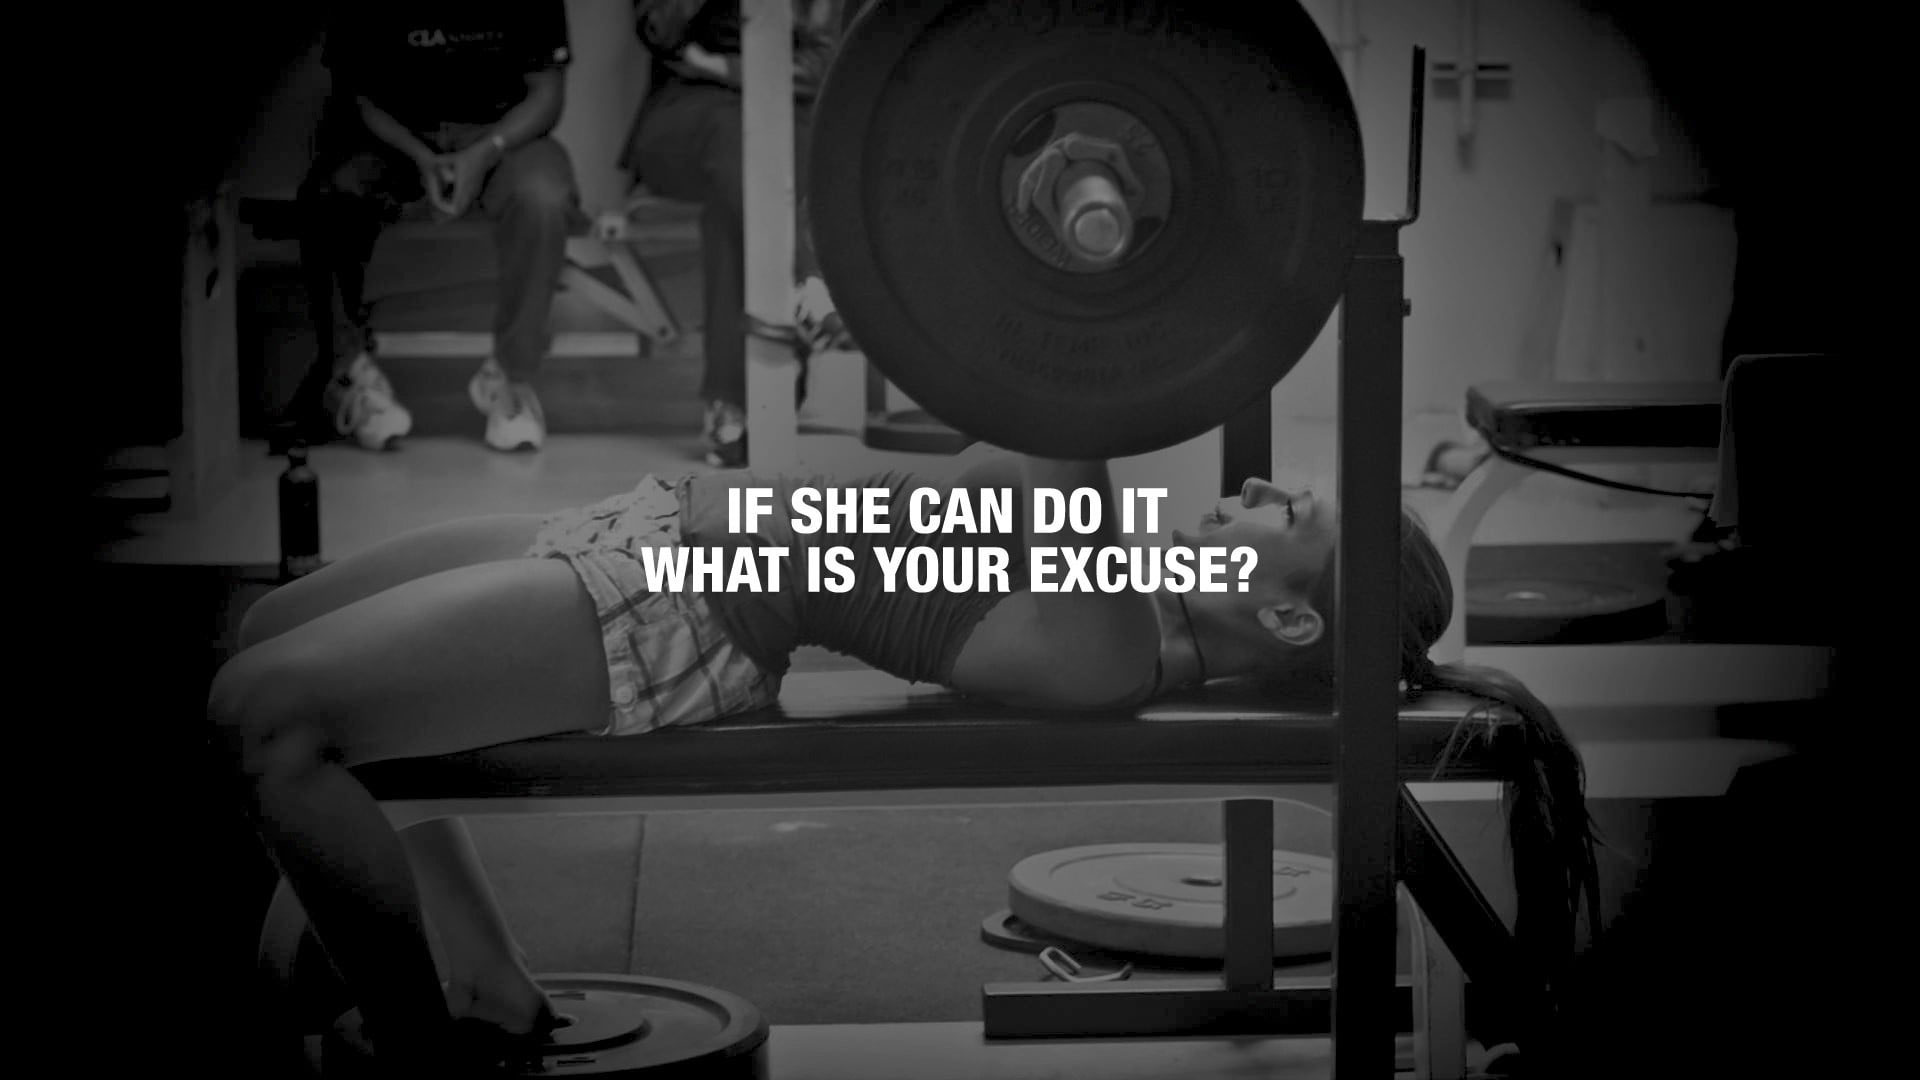 Wallpaper Bench Press With If She Can Do It What Is your excuse?